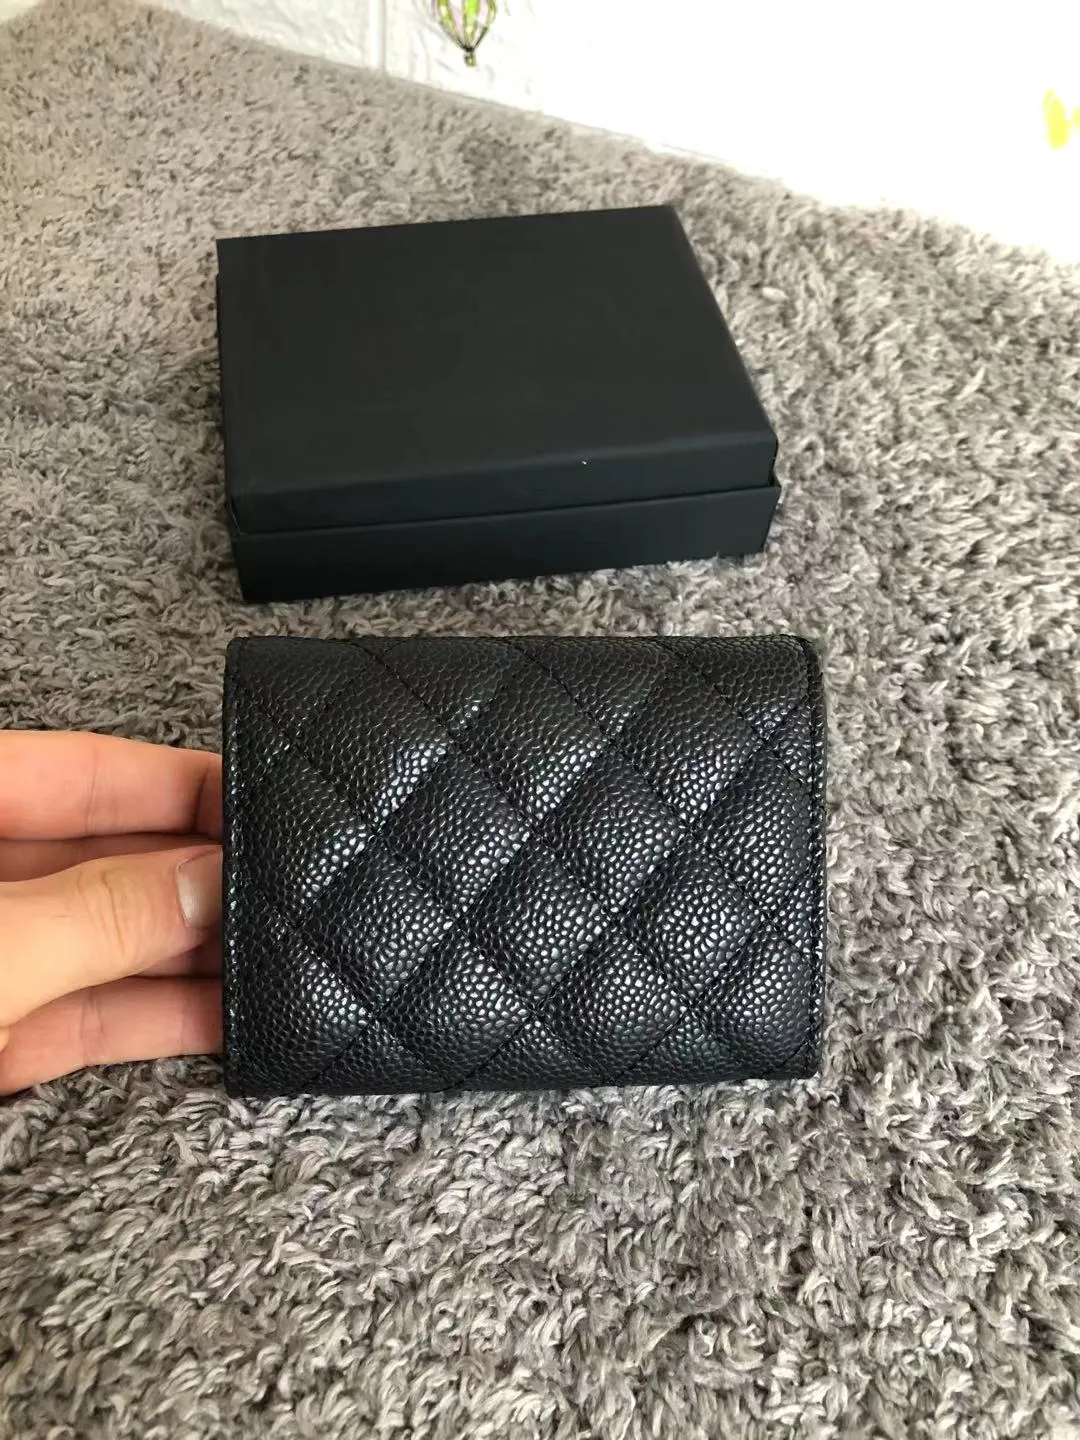 An Instagram blogger has recommended a designer wallet for women`s card bags with classic plies and high quality leather clasp